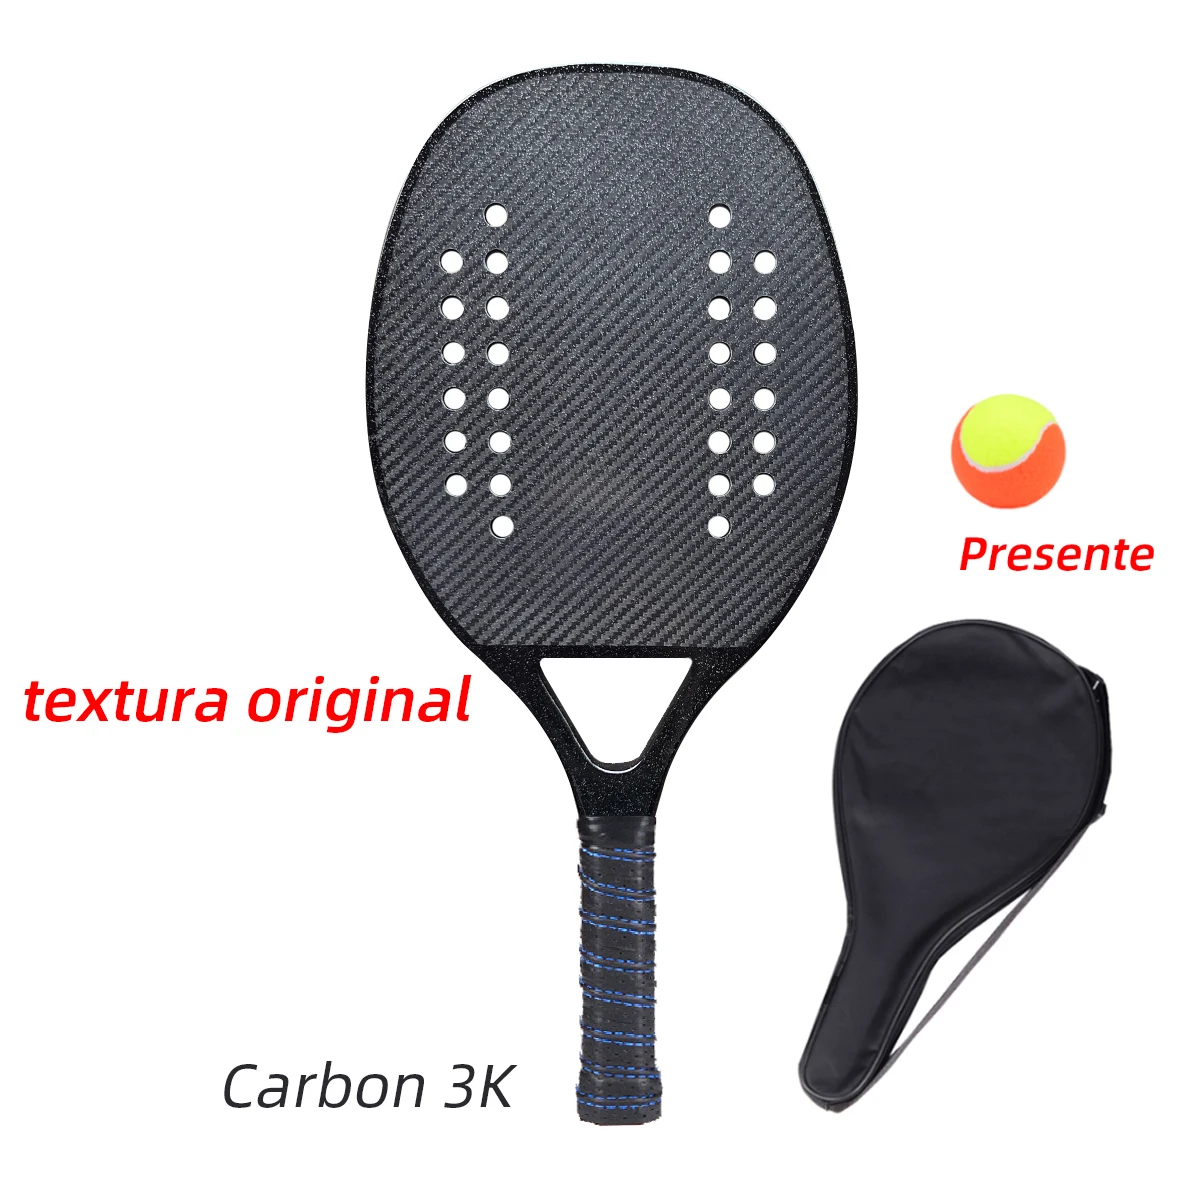 2022 New High Quality Full Carbon Fiber 3K Beach Tennis Racket Professional Rough Surface Soft Core Racquet with Bag and Ball